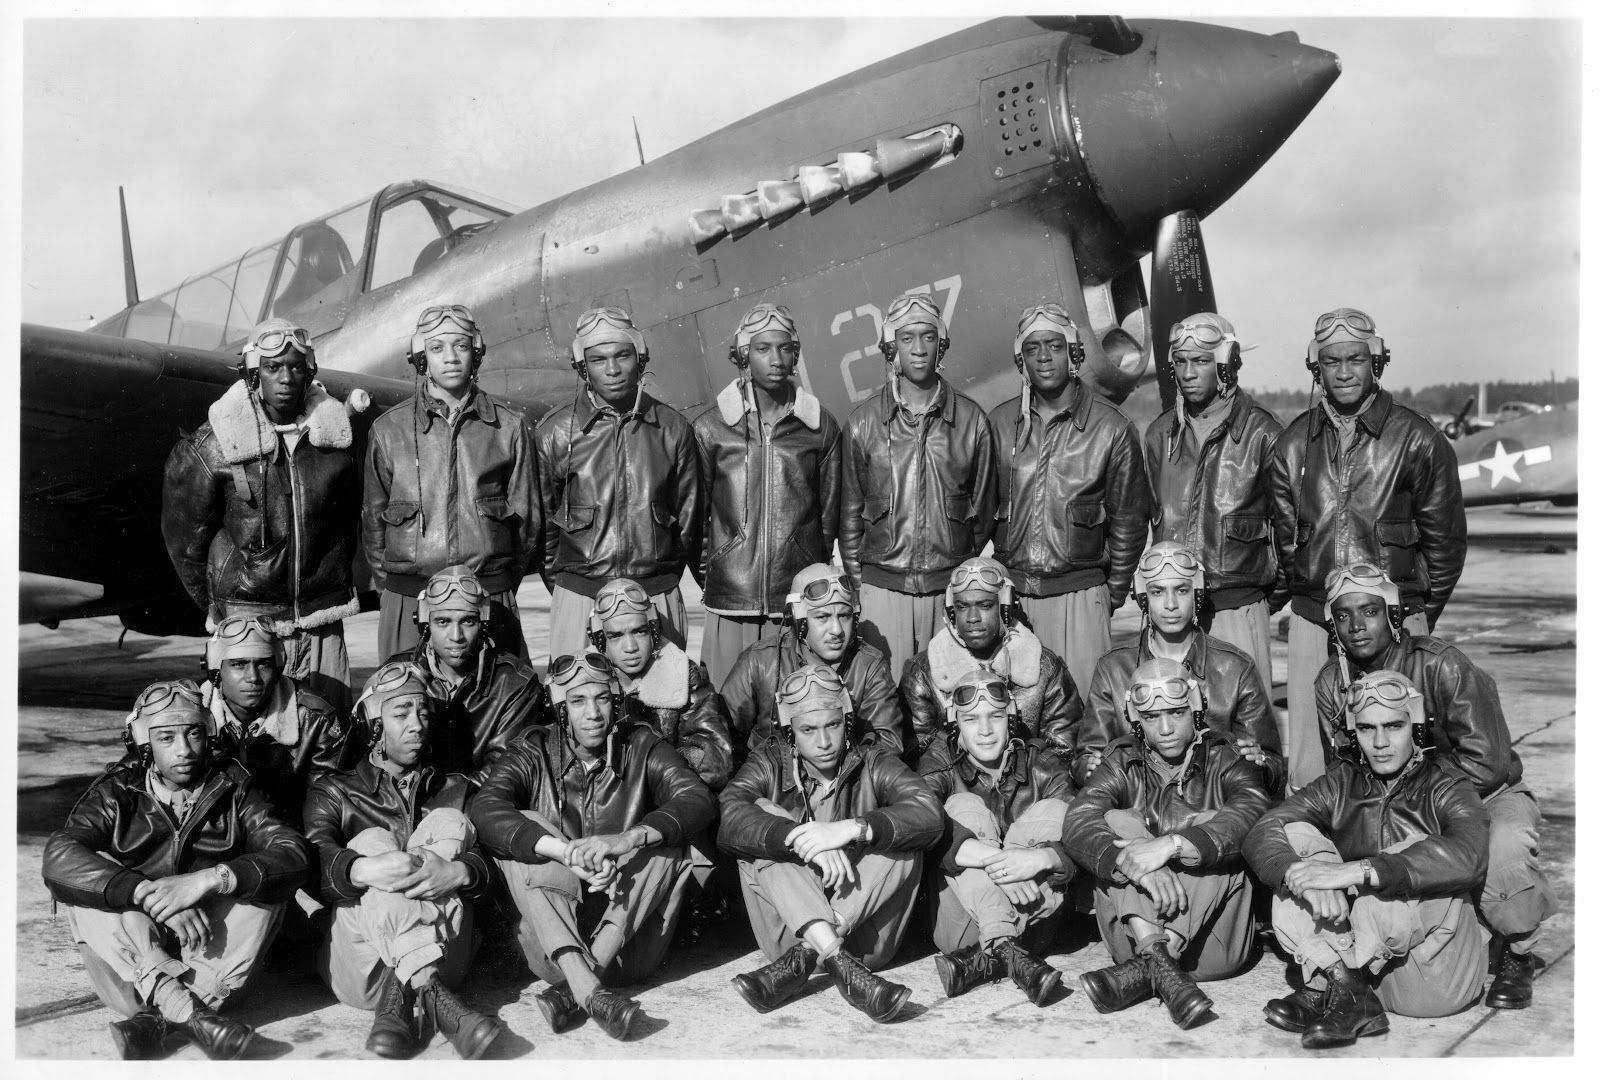 TUSKEGEE AIRMEN 8X10 PHOTO USA PICTURE WWII US MILITARY